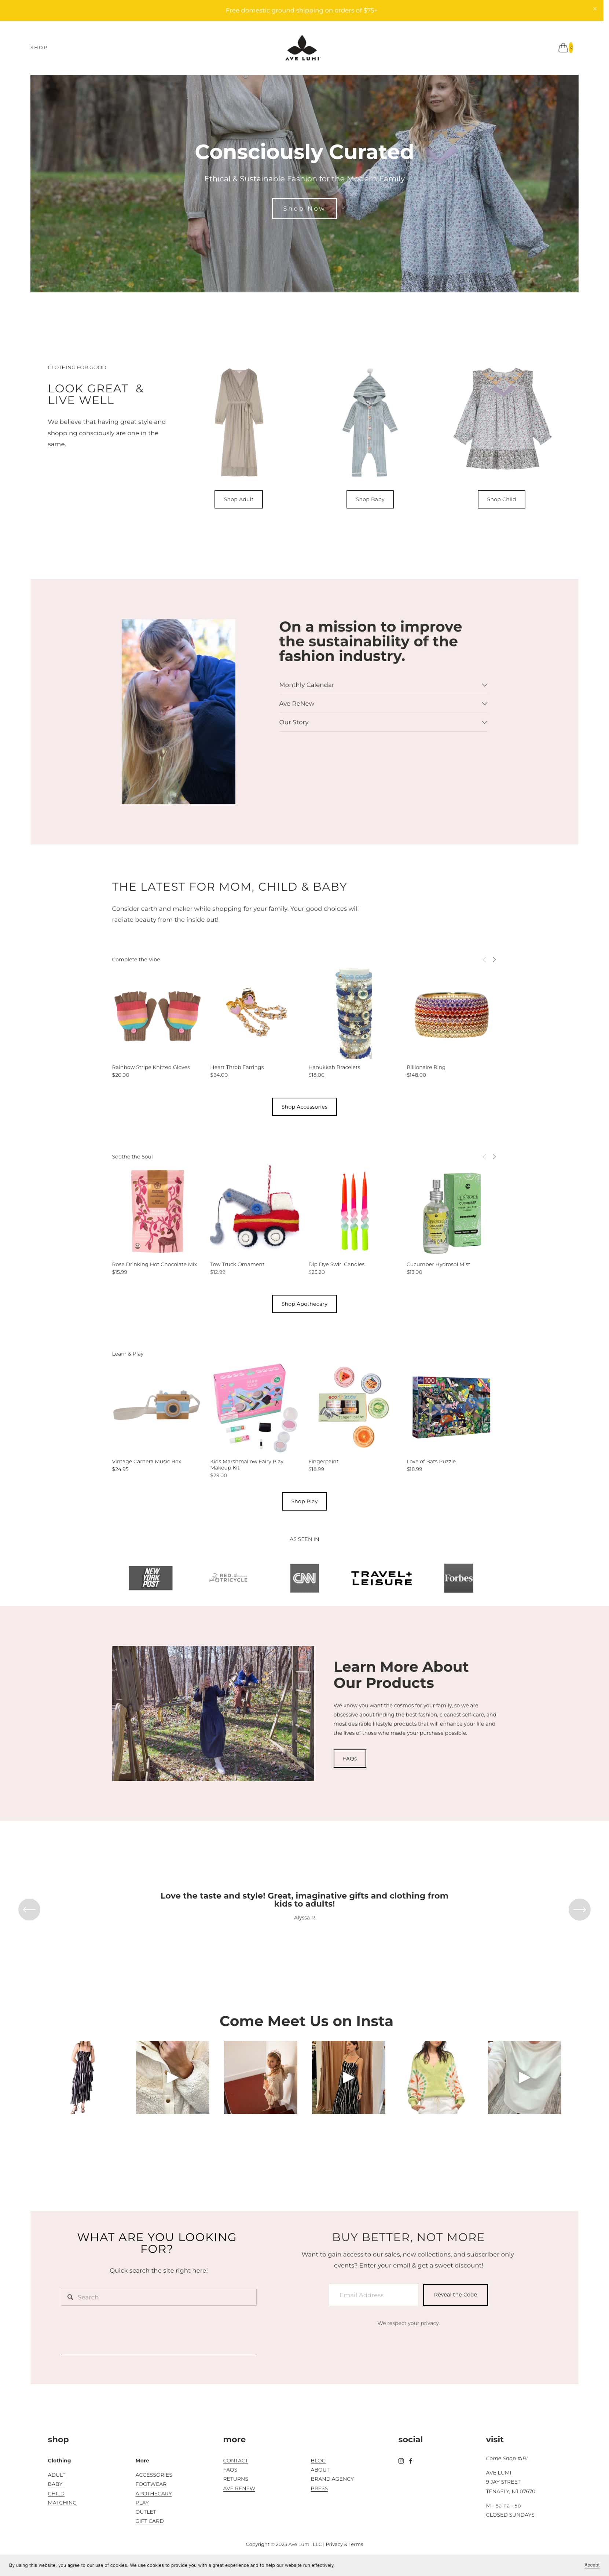 15 Squarespace Ecommerce Examples to Inspire Your Site